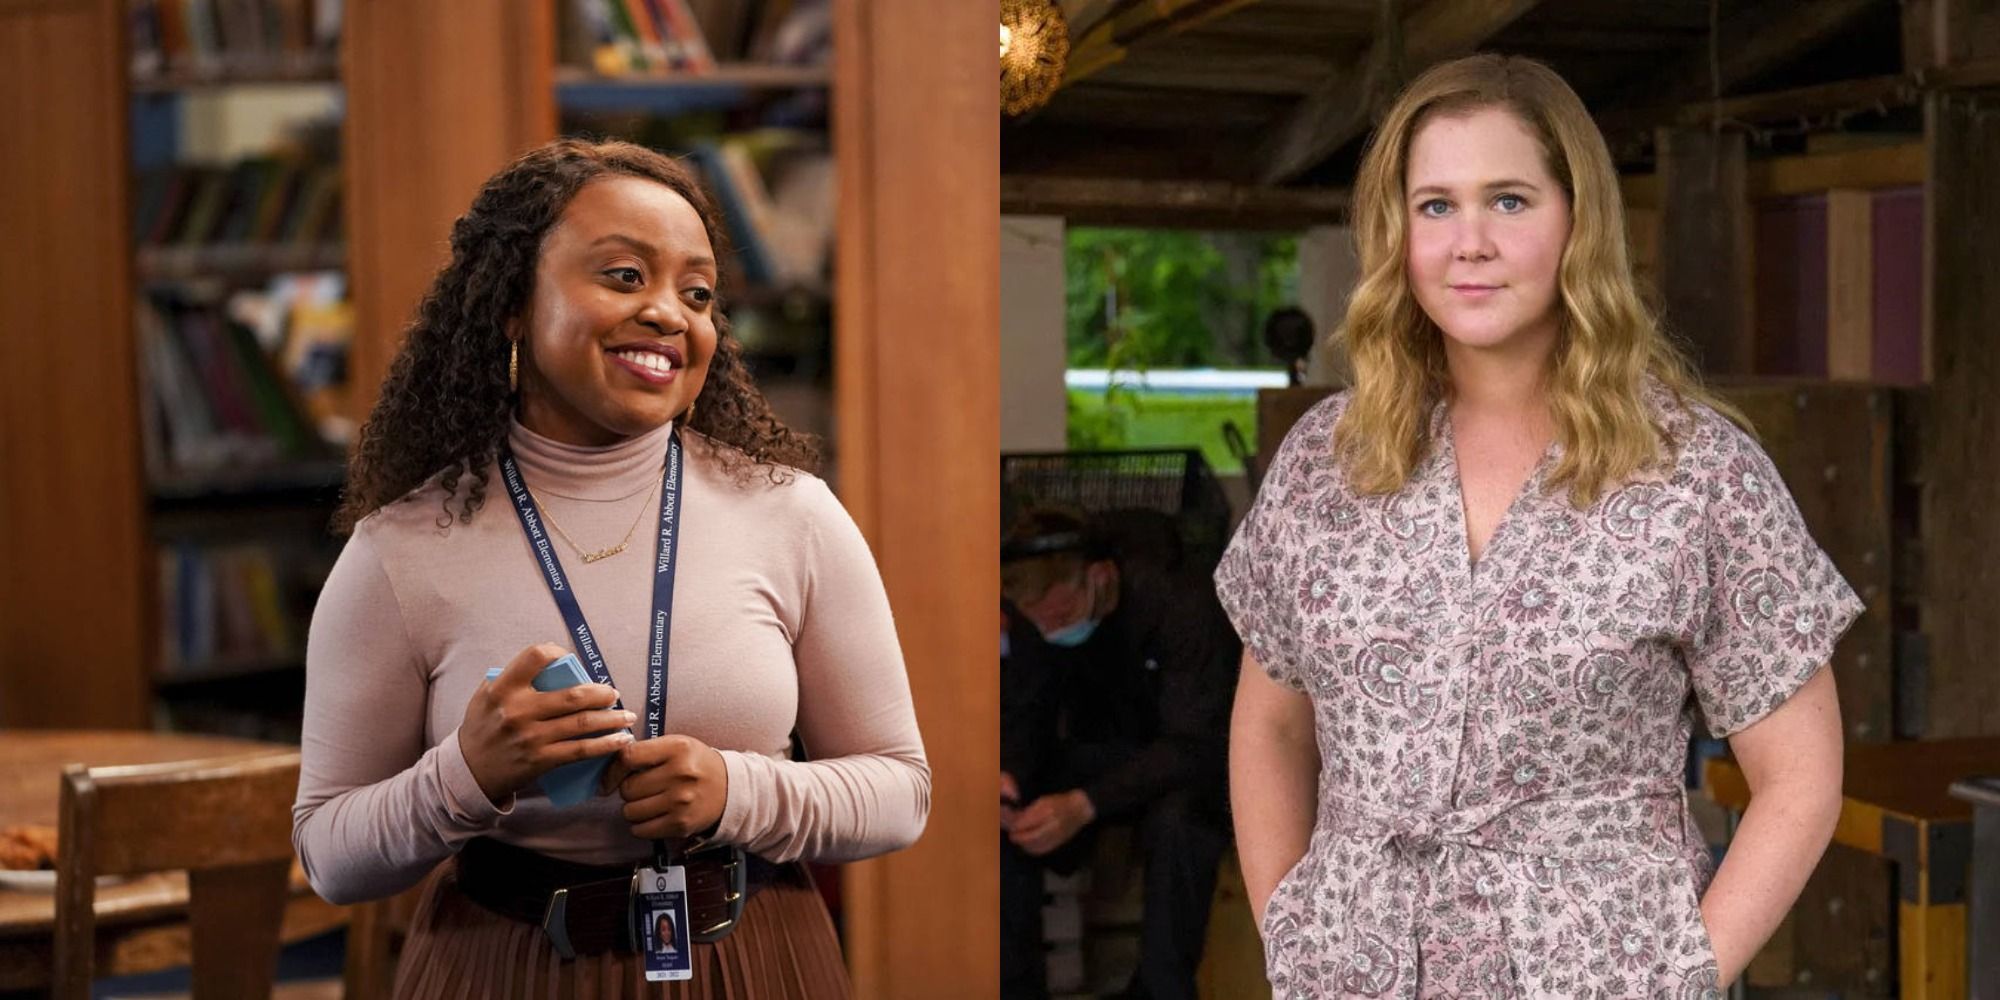 Two side by side images of Quinta Brunson and Amy Schumer